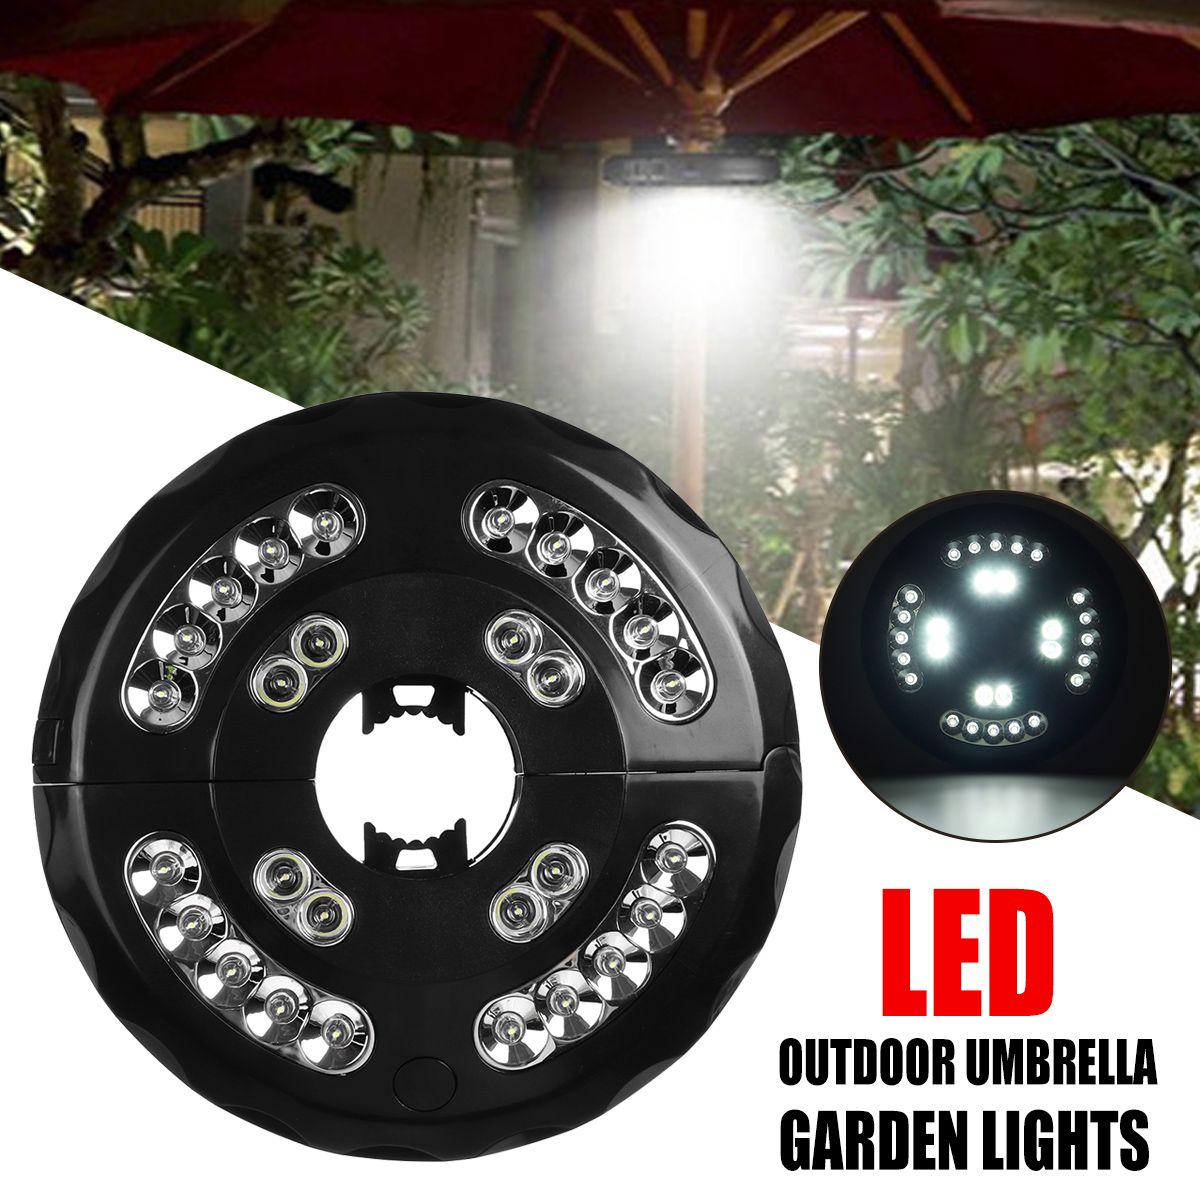 Portable-Patio-Umbrella-Pole-Lights-28-Led-Bulb-Outdoor-Garden-Yard-Lawn-Camping-Night-Lights-With-H-1715860